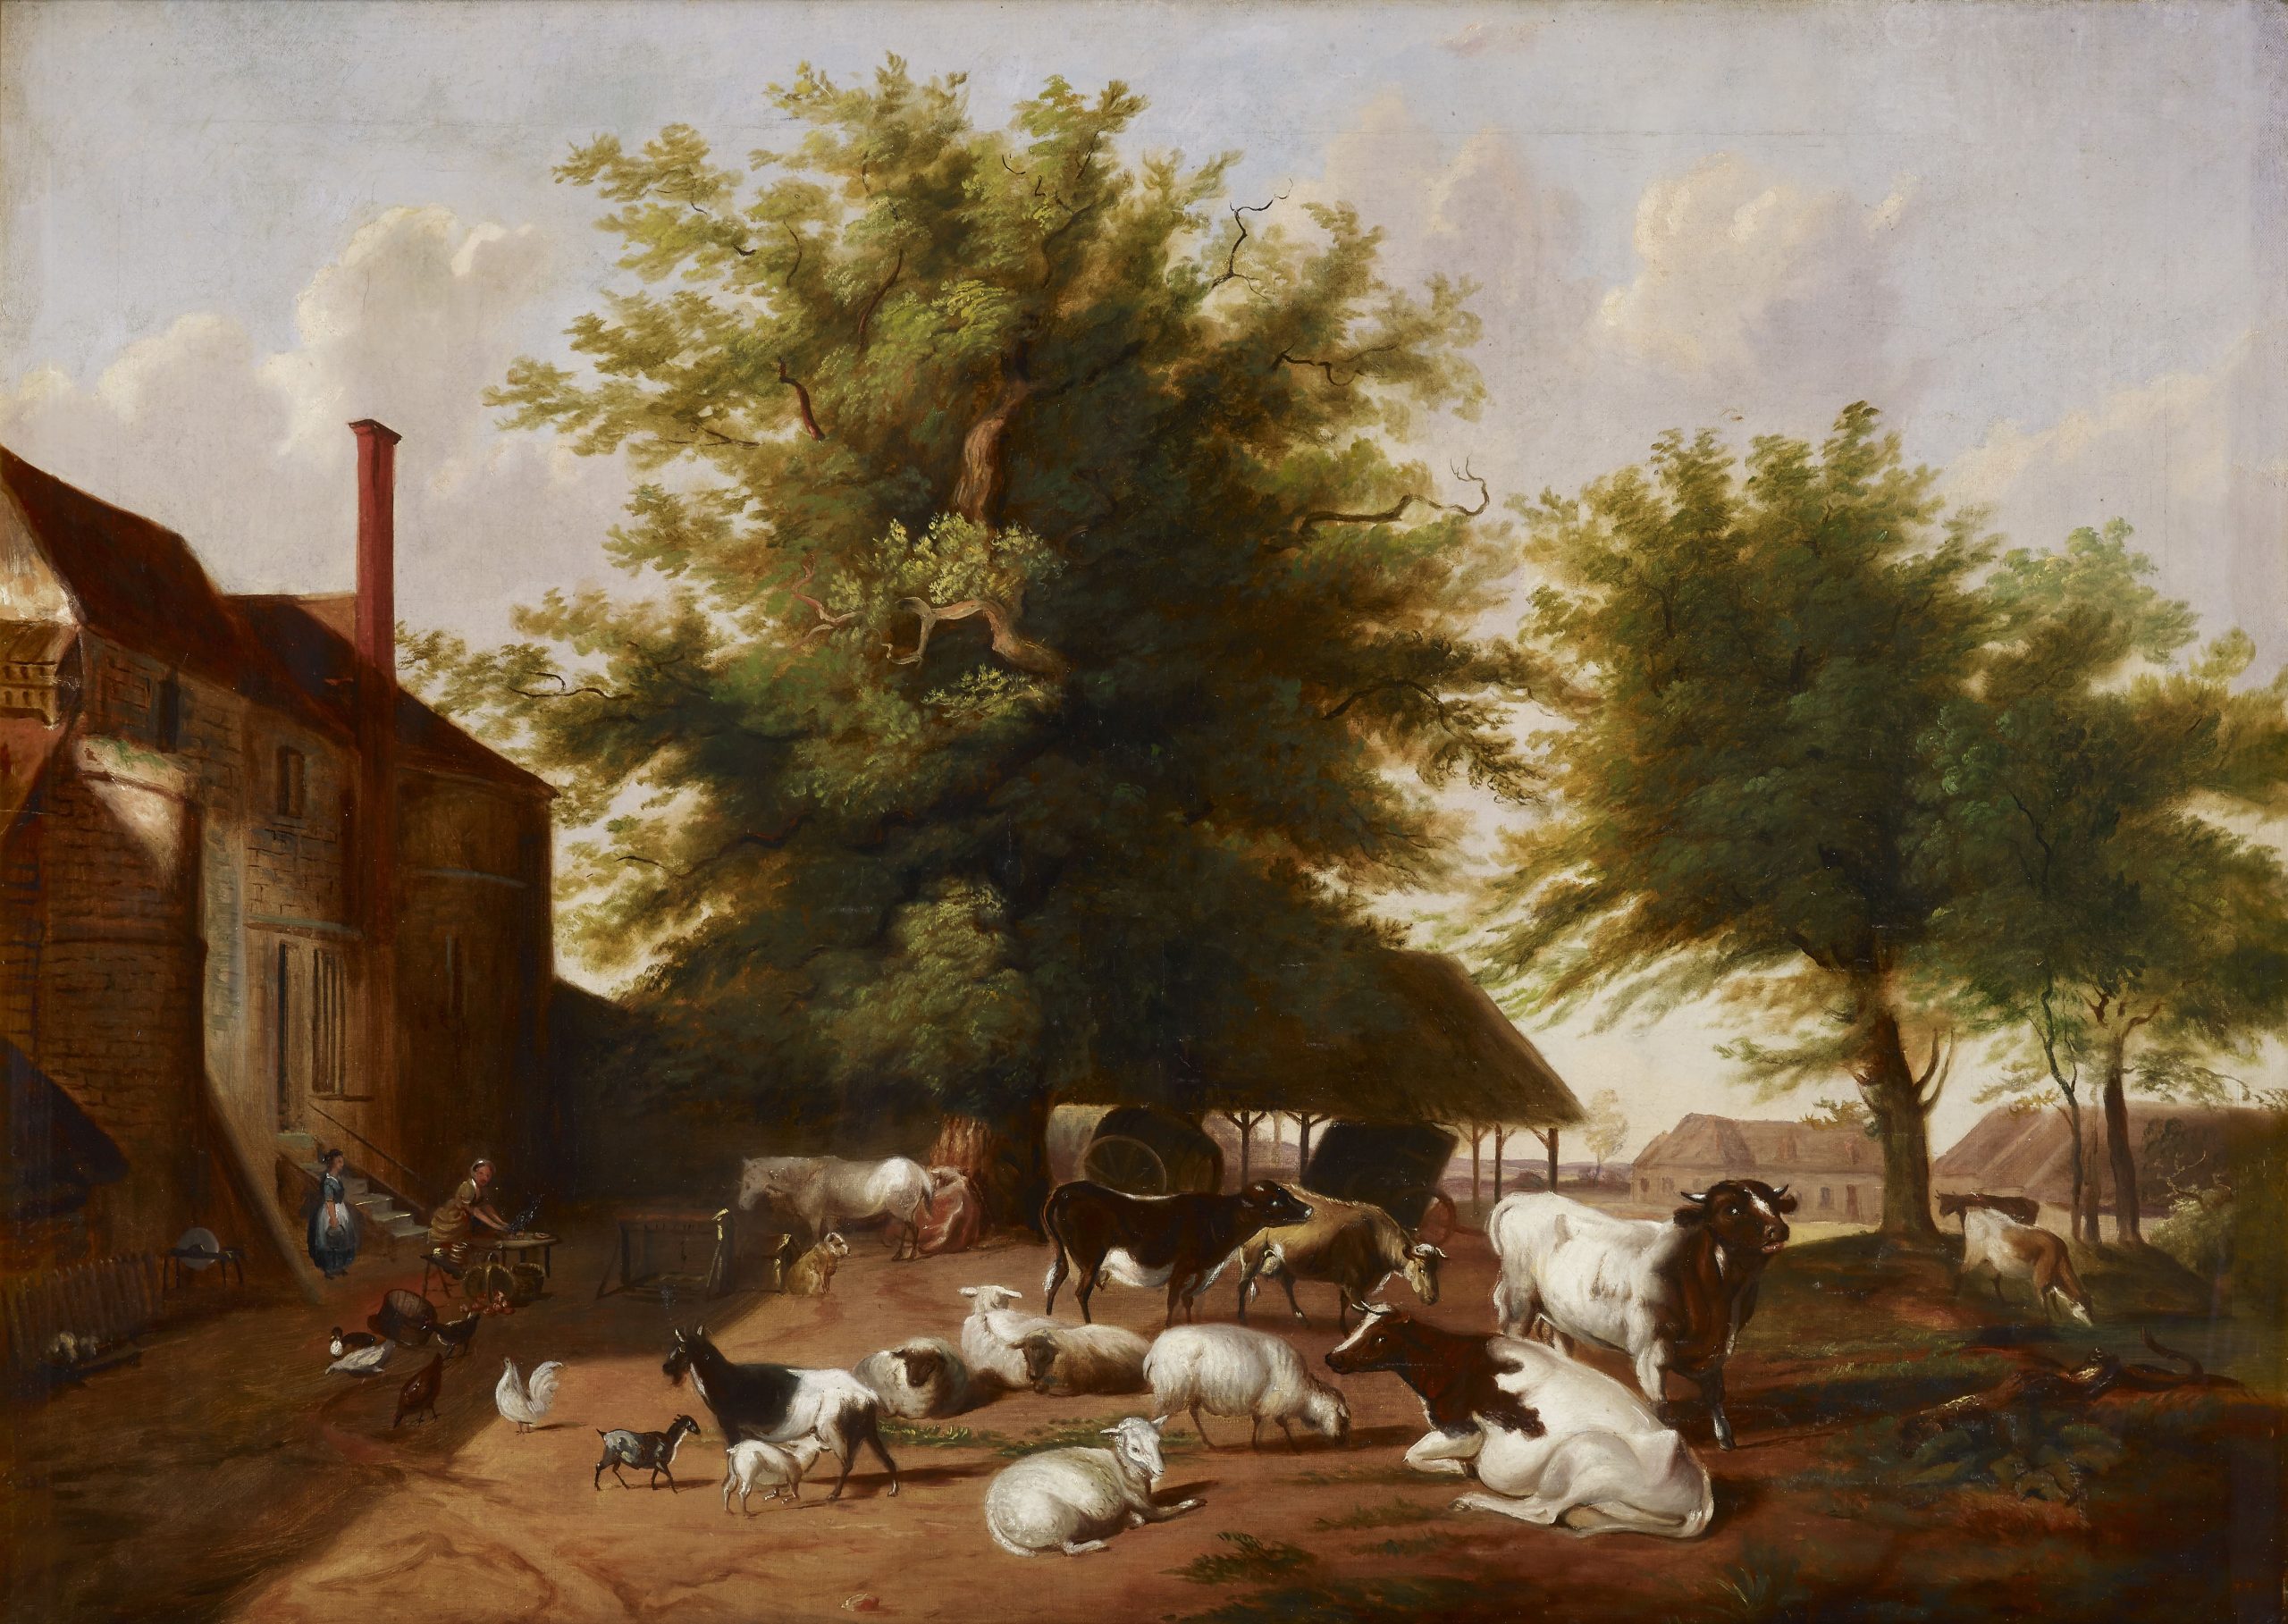 Painting of a farmyard with cattle, sheep, goats, chickens and other farm animals. 